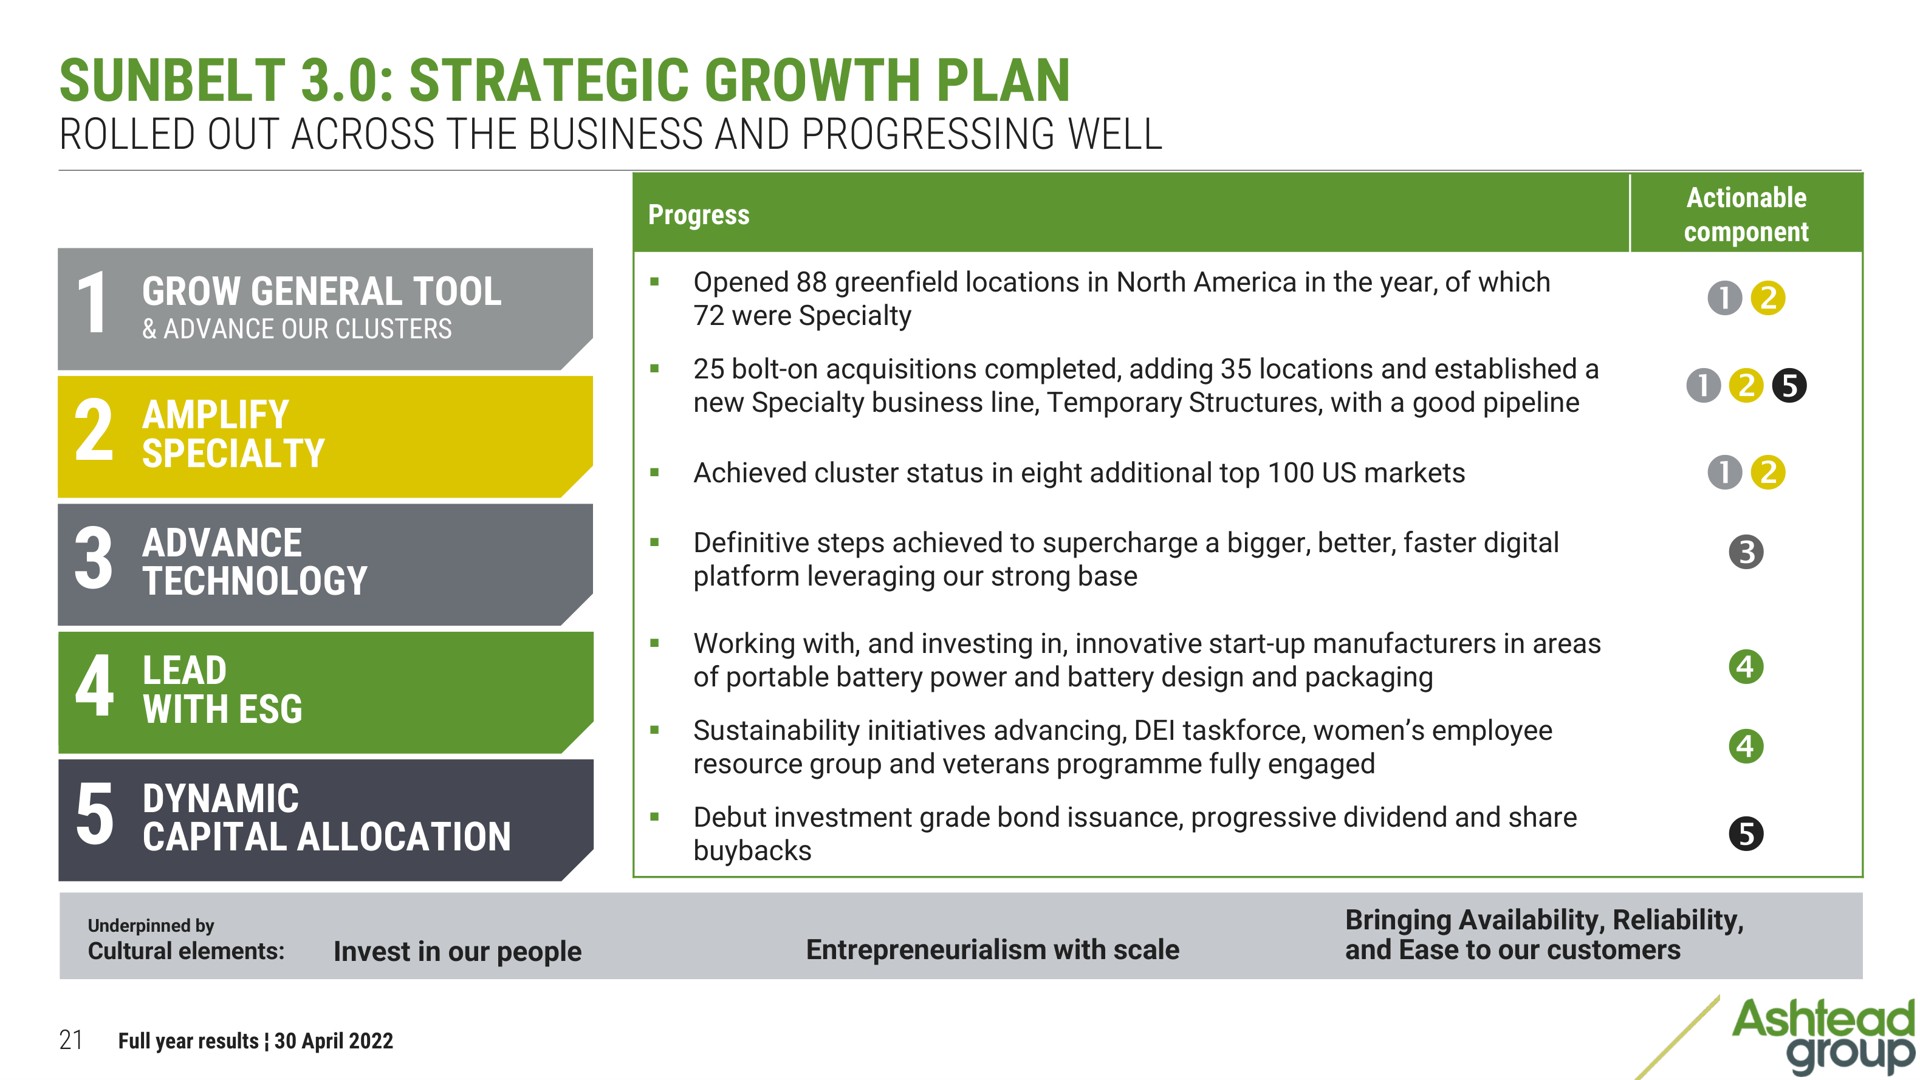 strategic growth plan rolled out across the business and progressing well | Ashtead Group